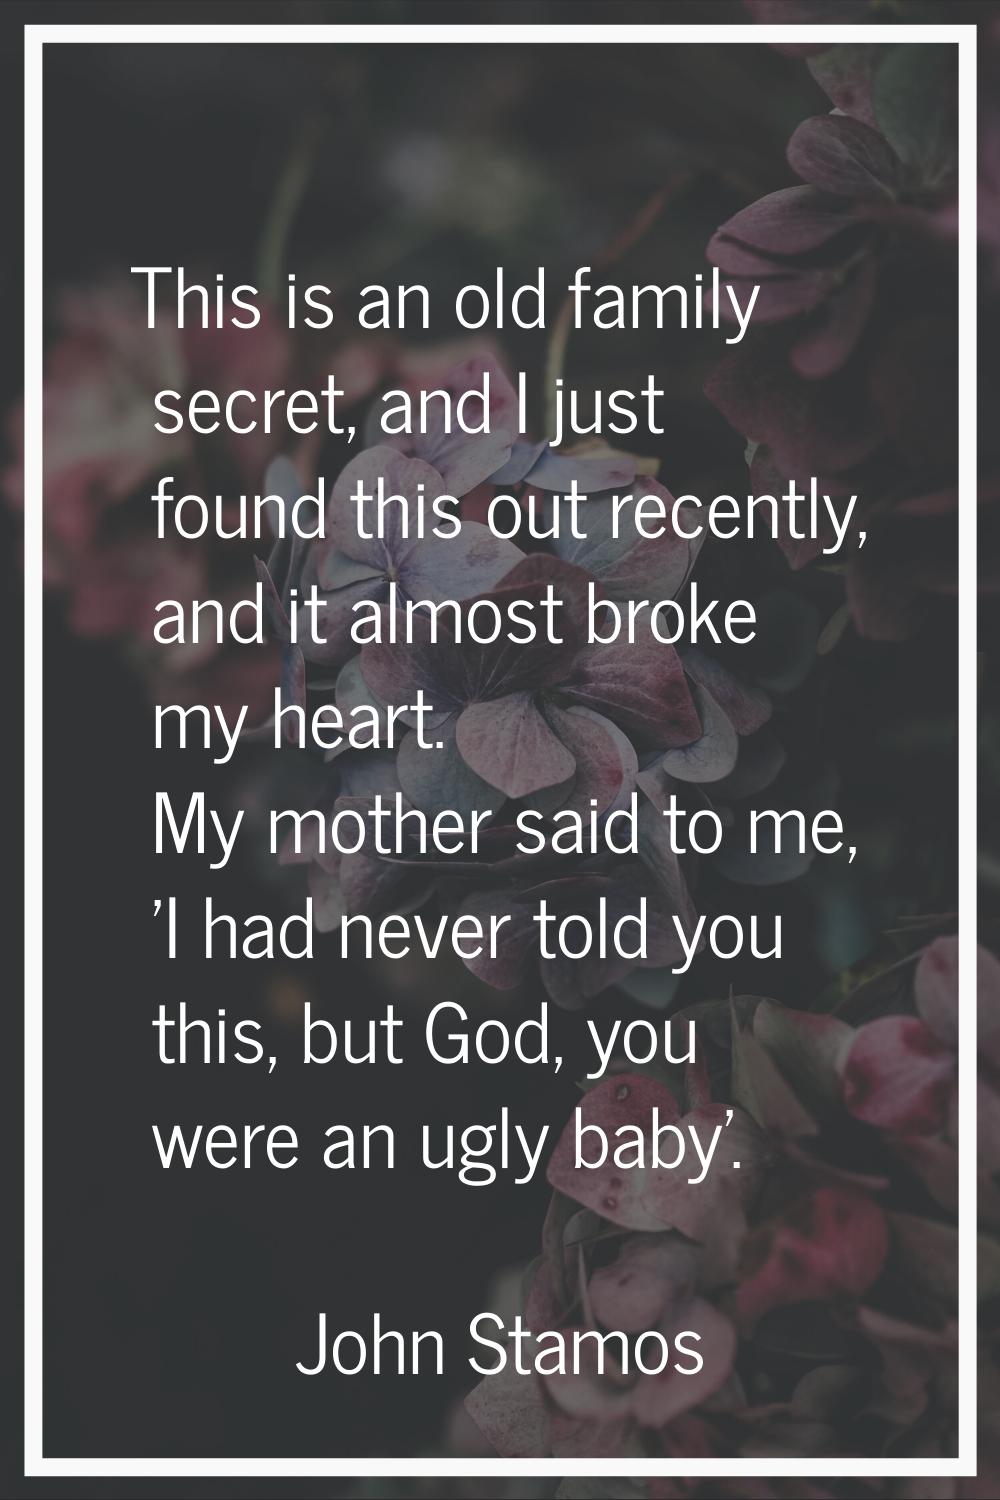 This is an old family secret, and I just found this out recently, and it almost broke my heart. My 